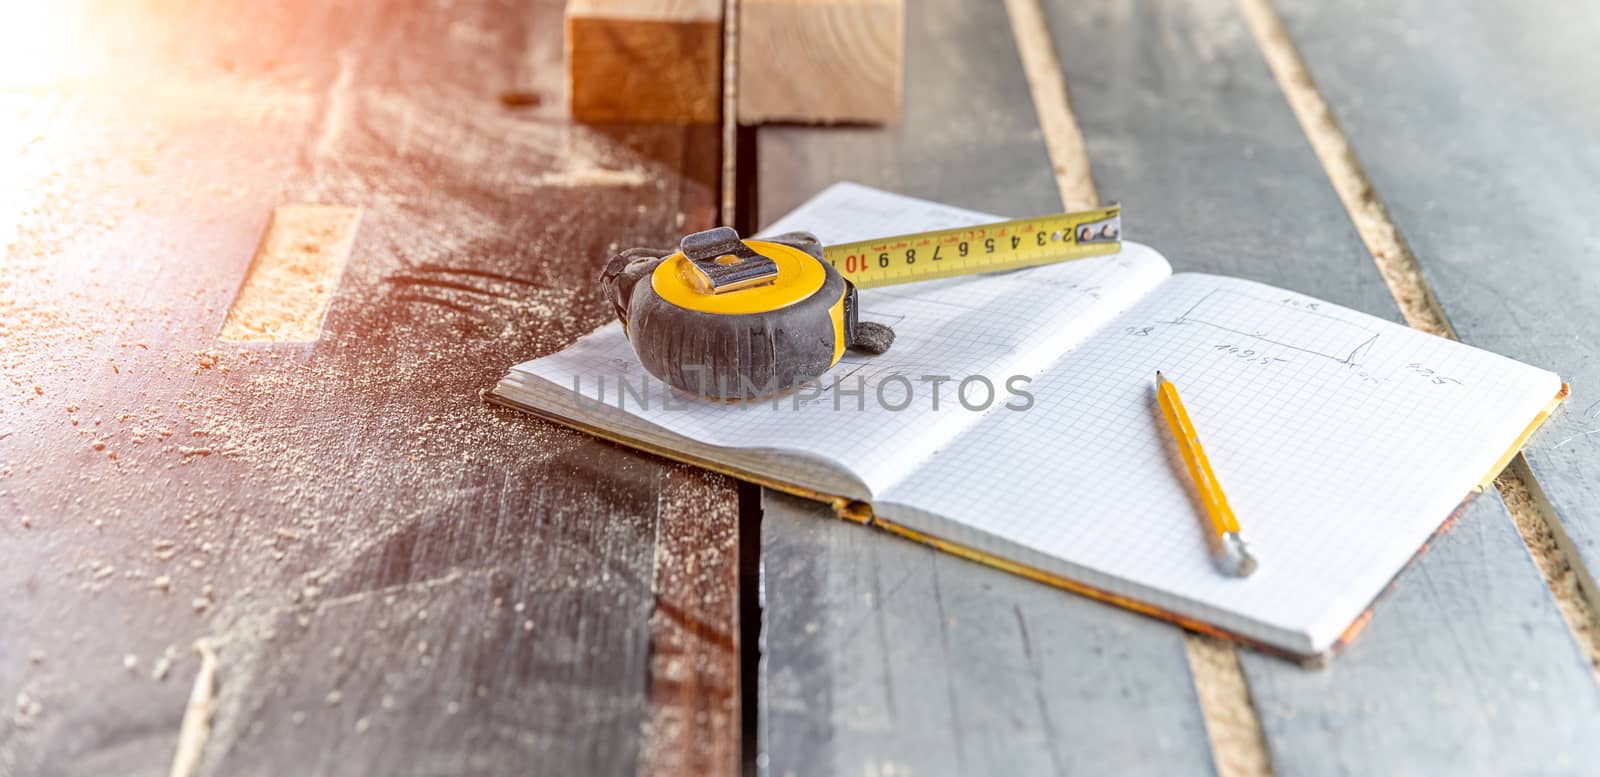 draw prepared wood products in a workbook in a joinery. tape measure, pencil and notebook on the table with chainsaw.